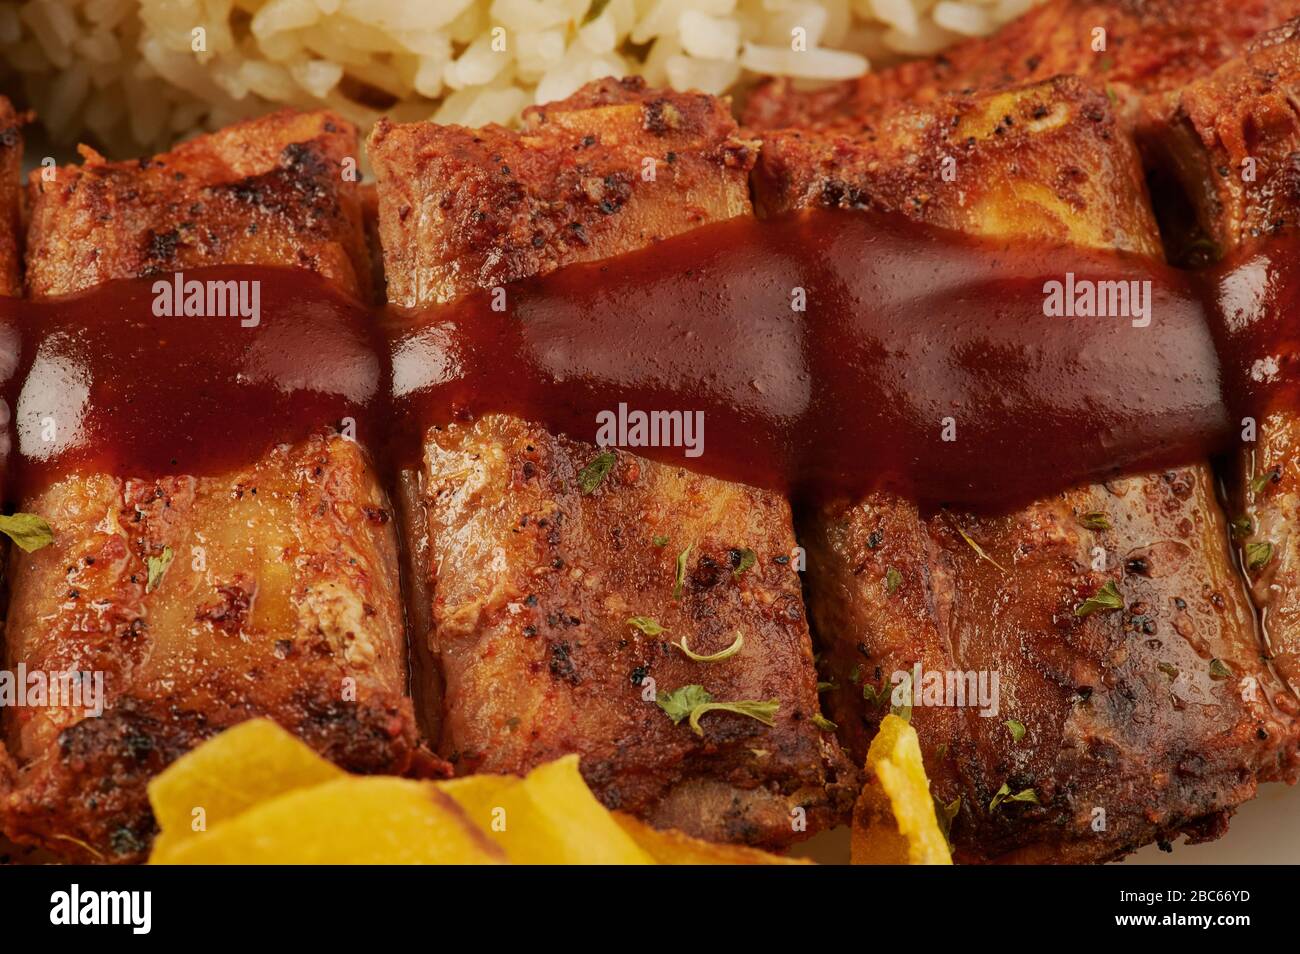 Close up of bbq grilled pork ribs with tomato ketchup Stock Photo